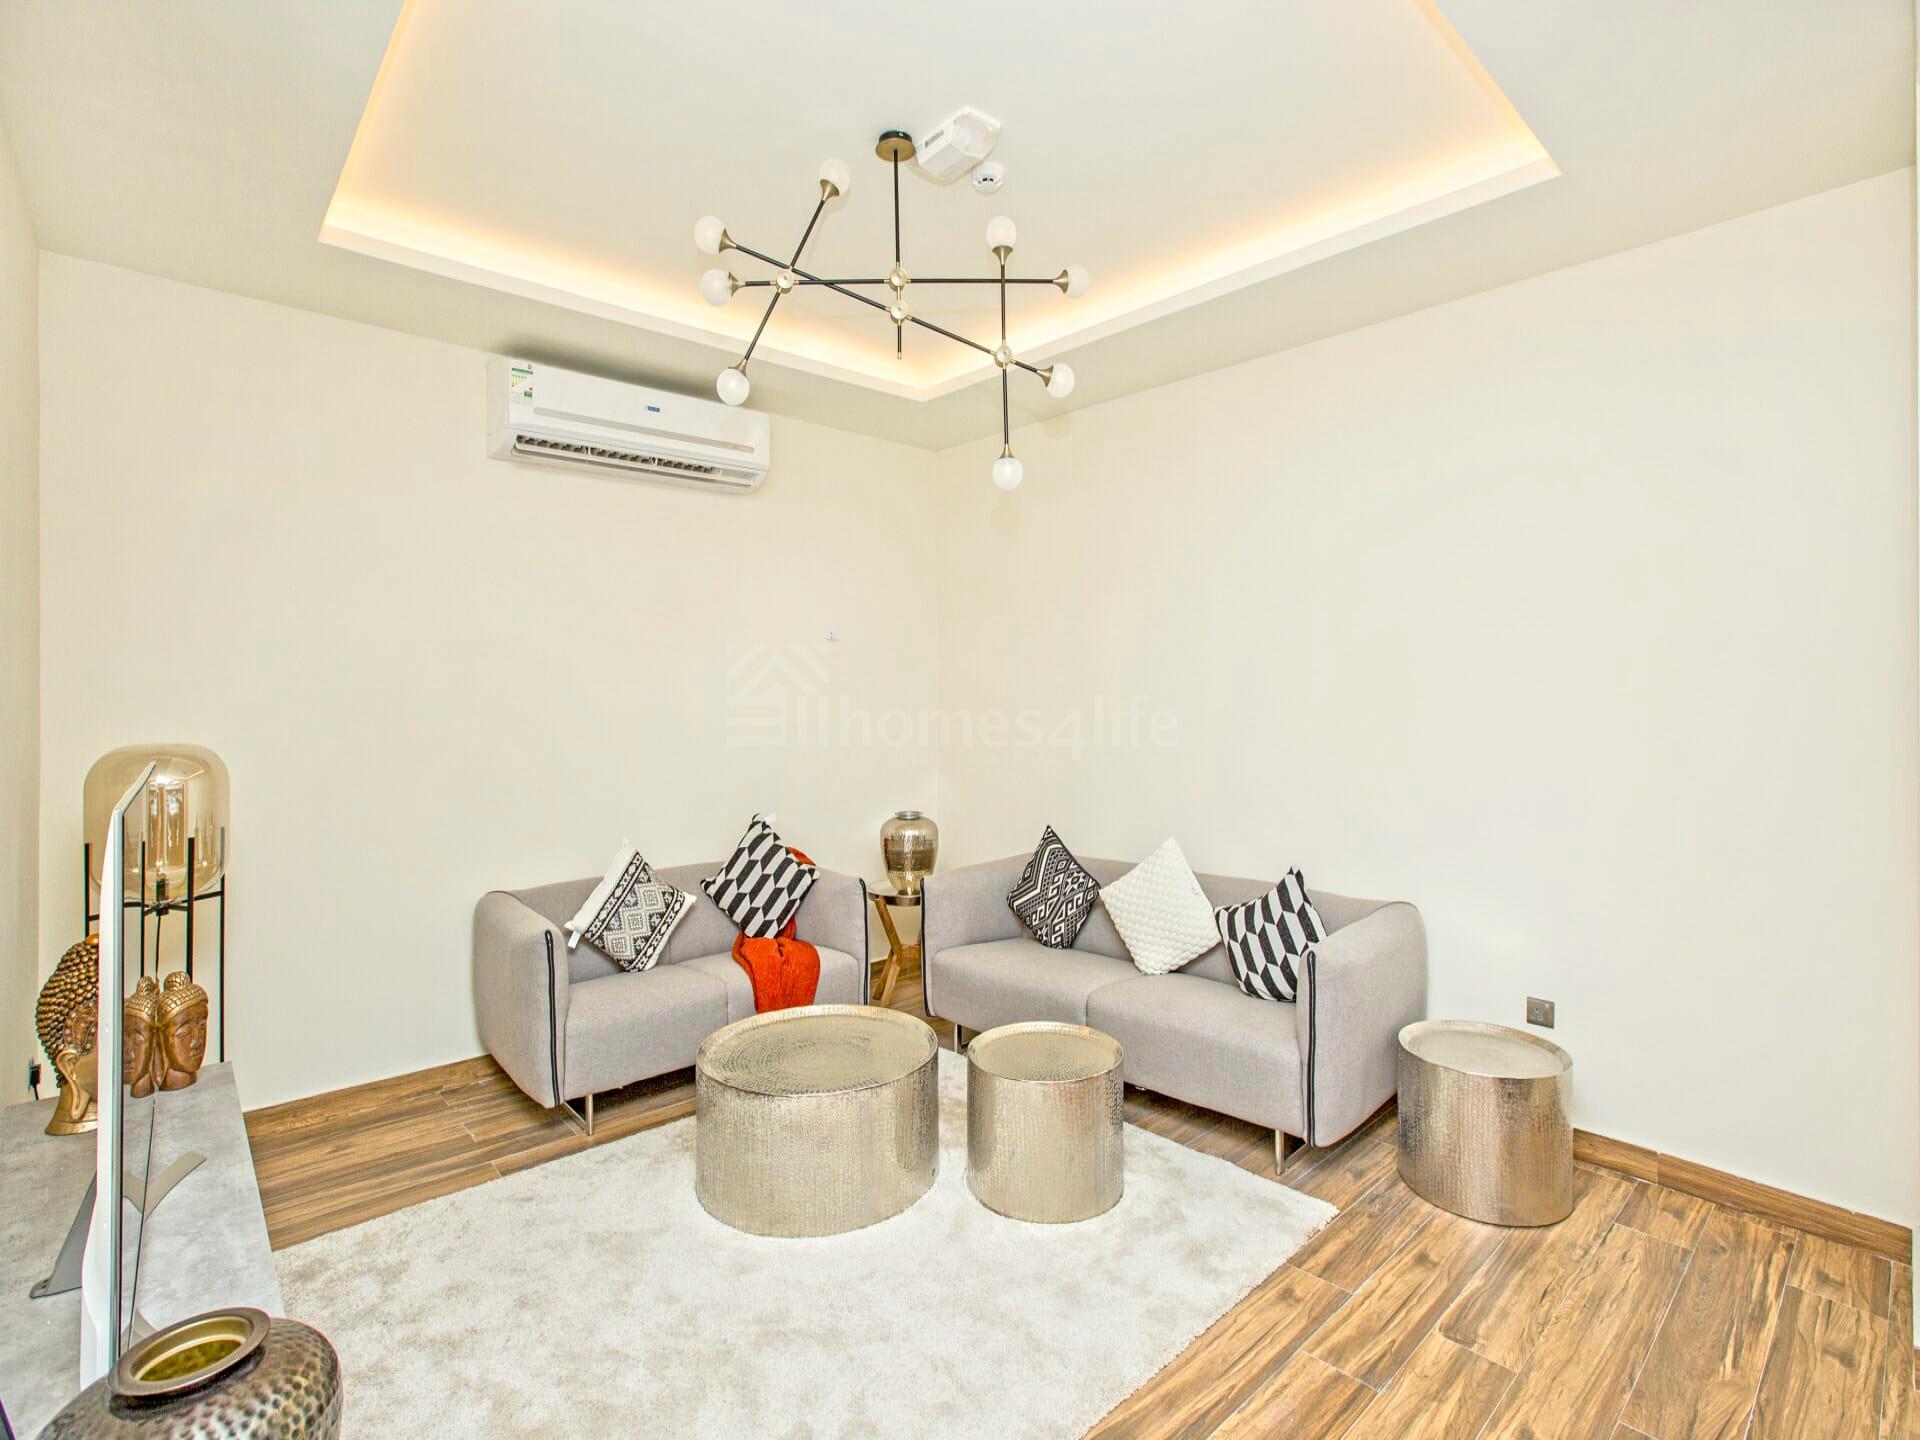 Real Estate_Apartments for Sale_Meydan City